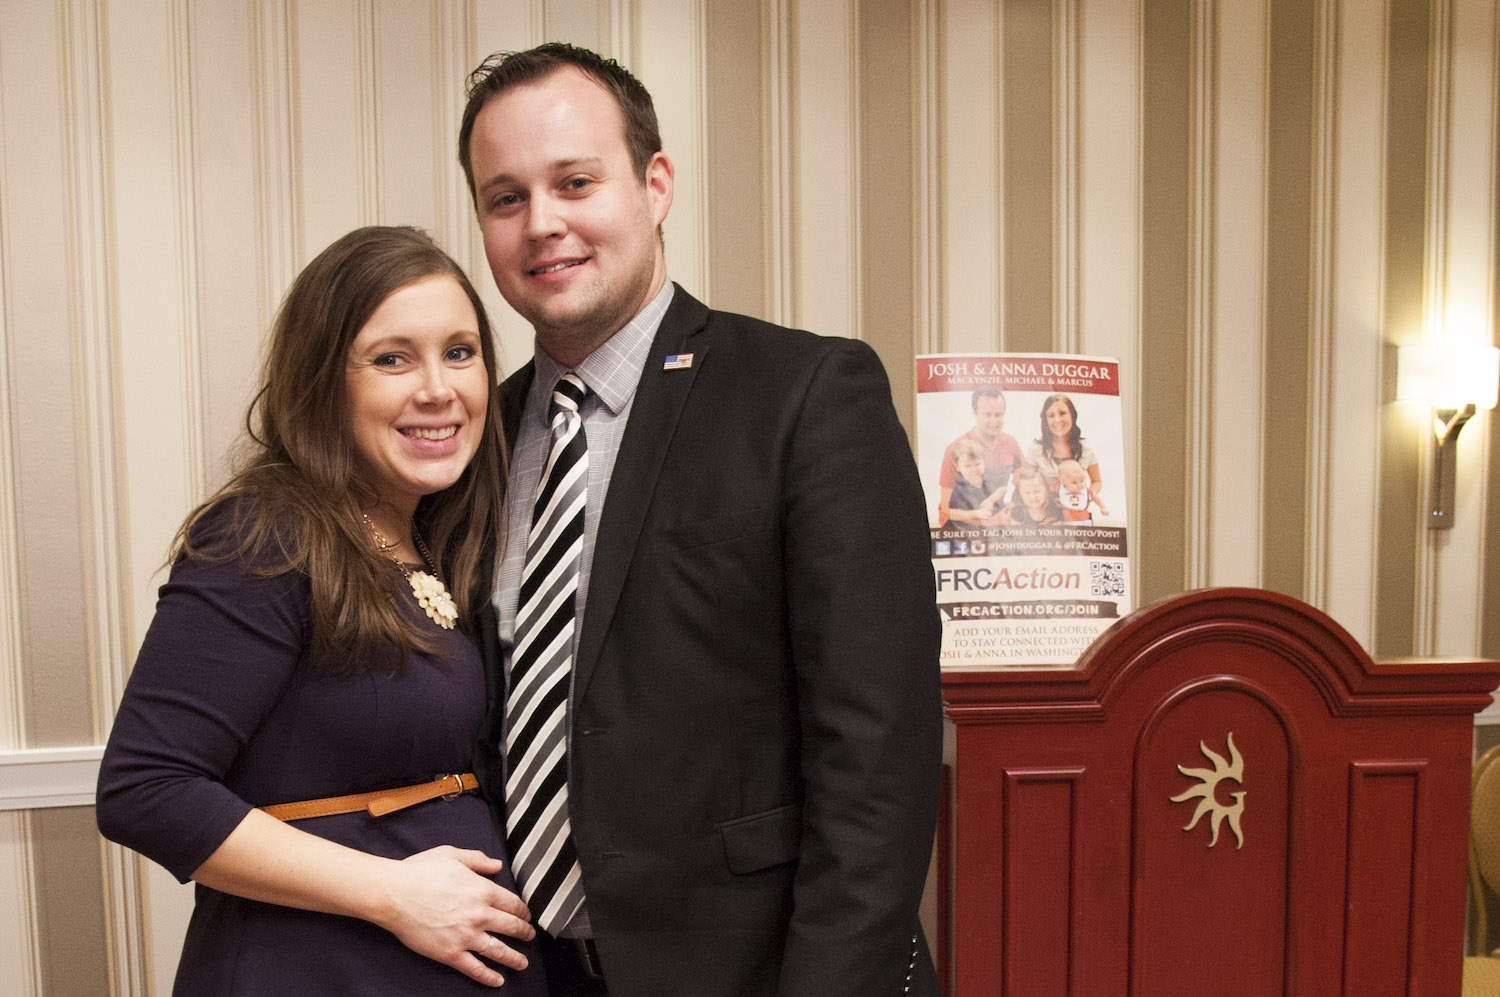 Anna Duggar and Josh Duggar of the Duggar family standing next to each other and smiling